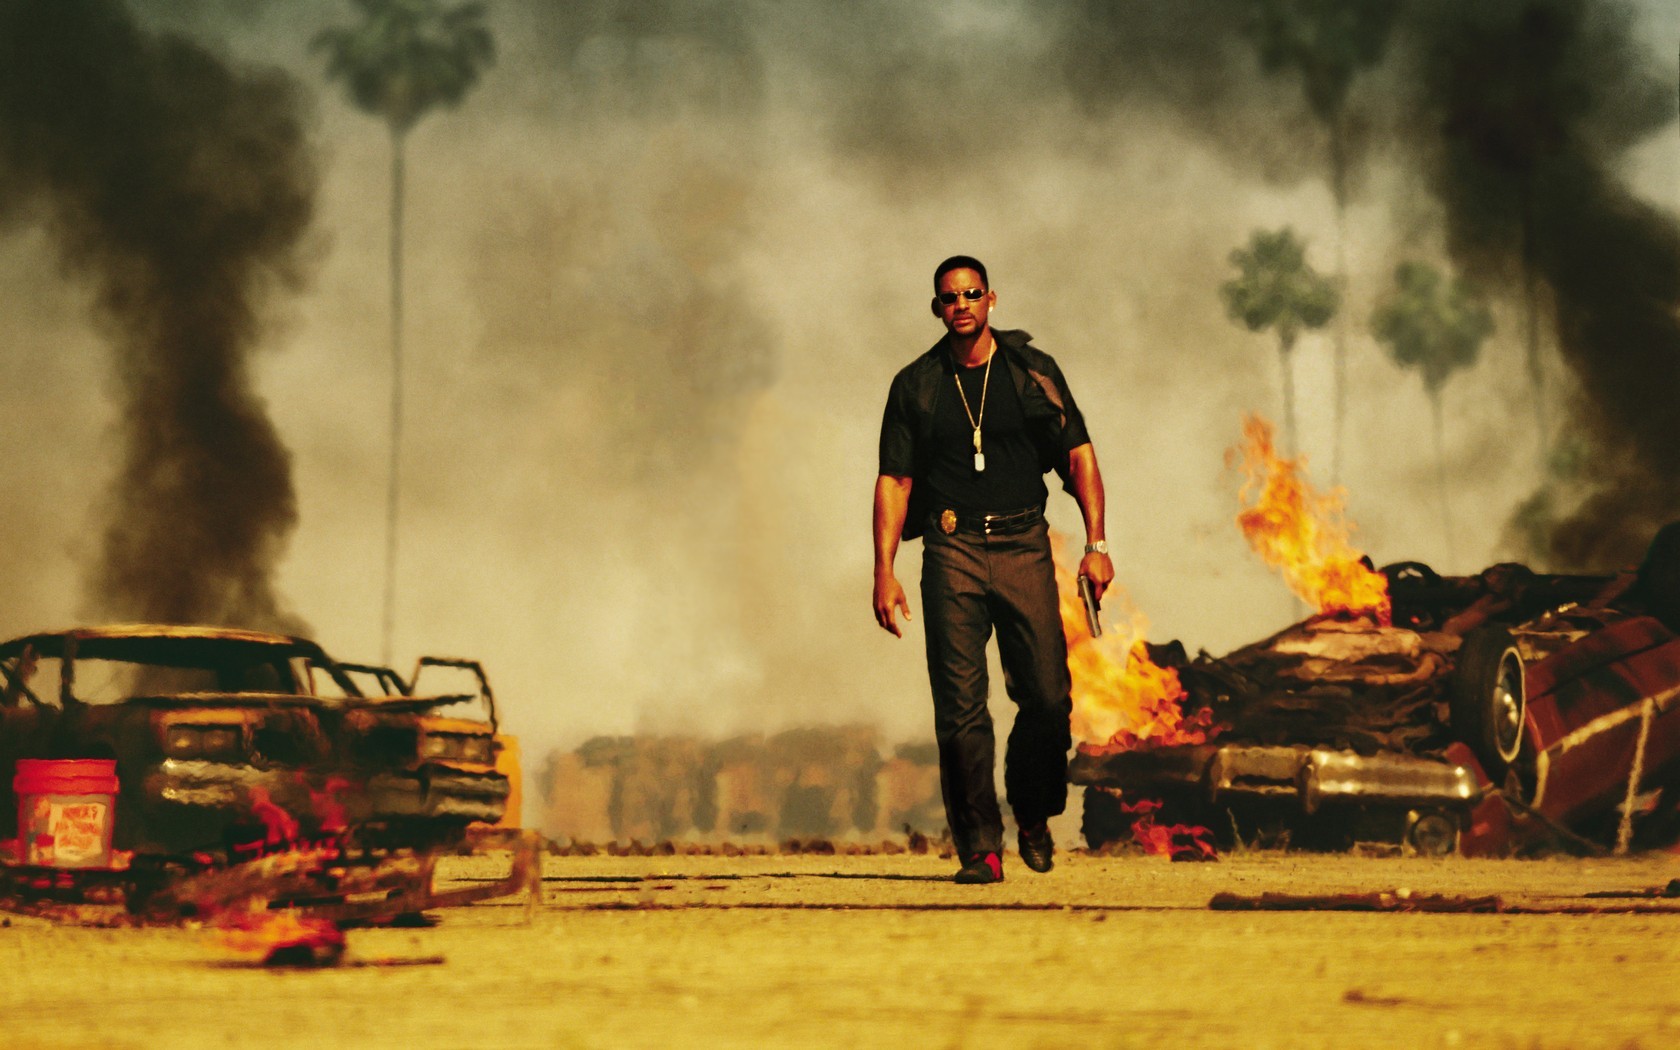 Bad Boys Wallpaper and Background Image | 1680x1050 | ID ...